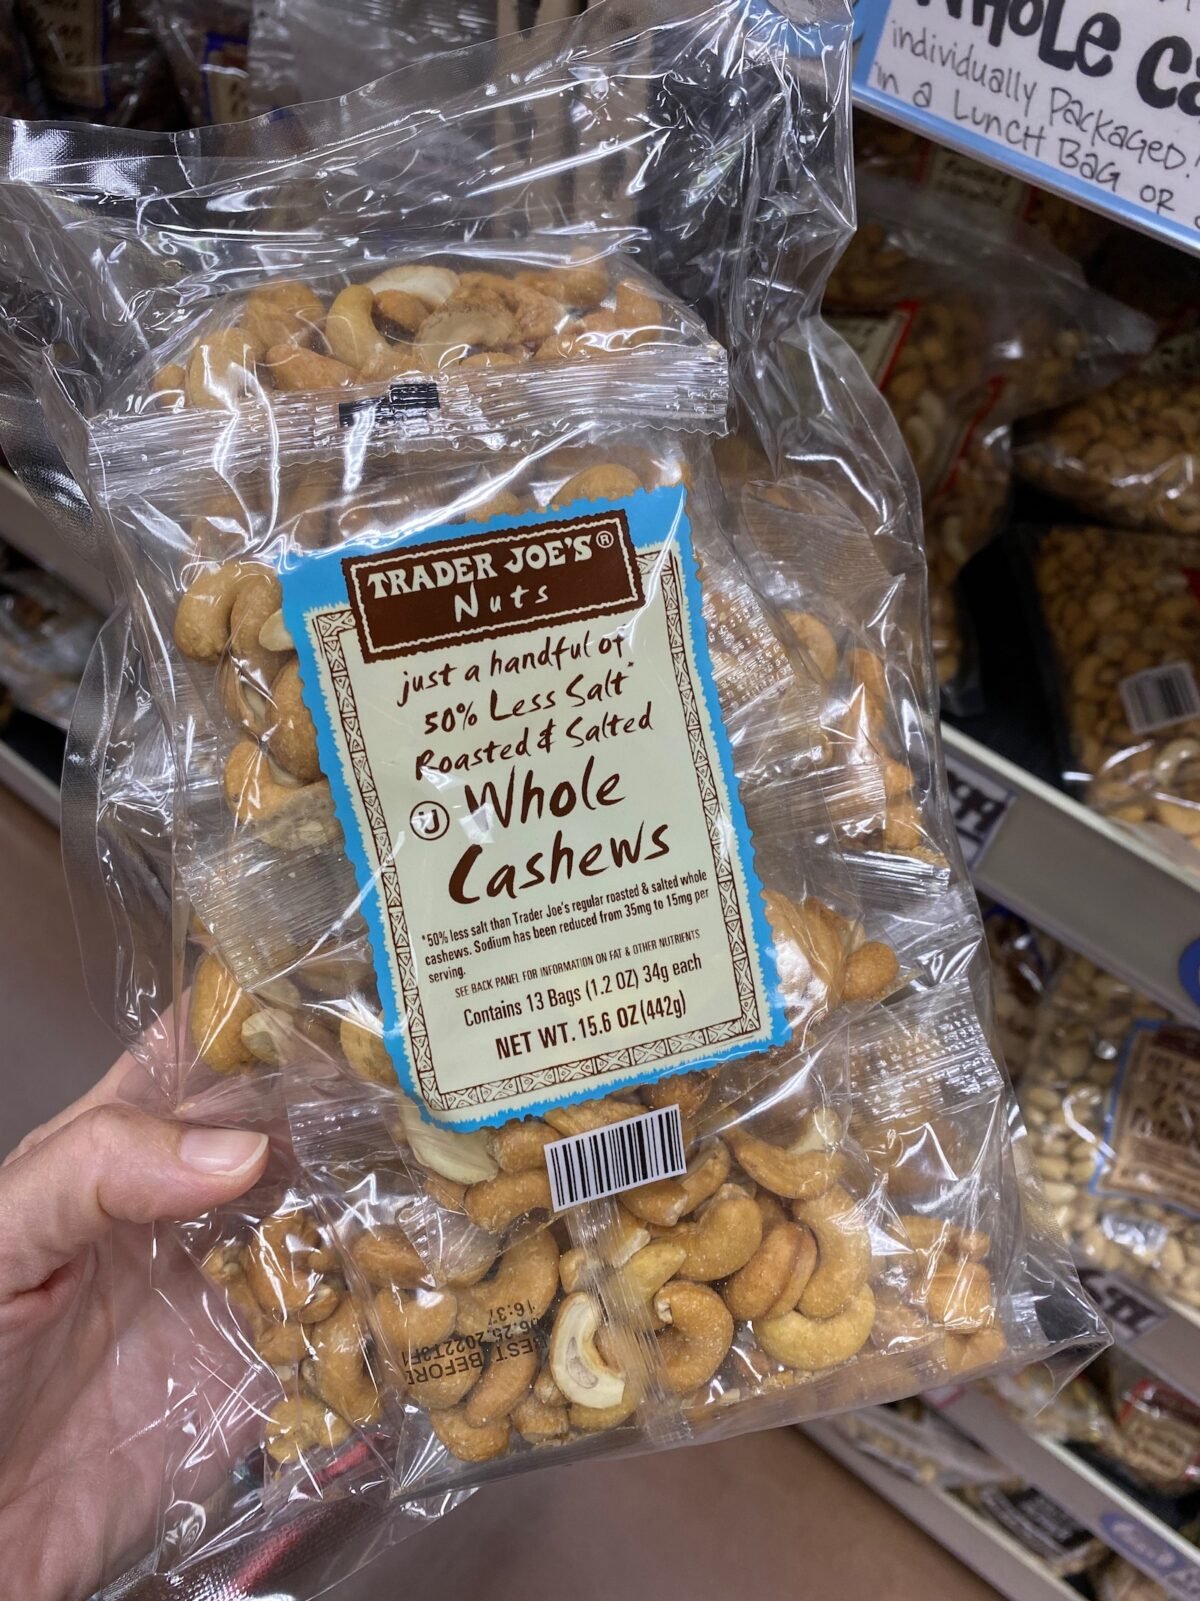 Bag of whole cashews from Trader Joe's